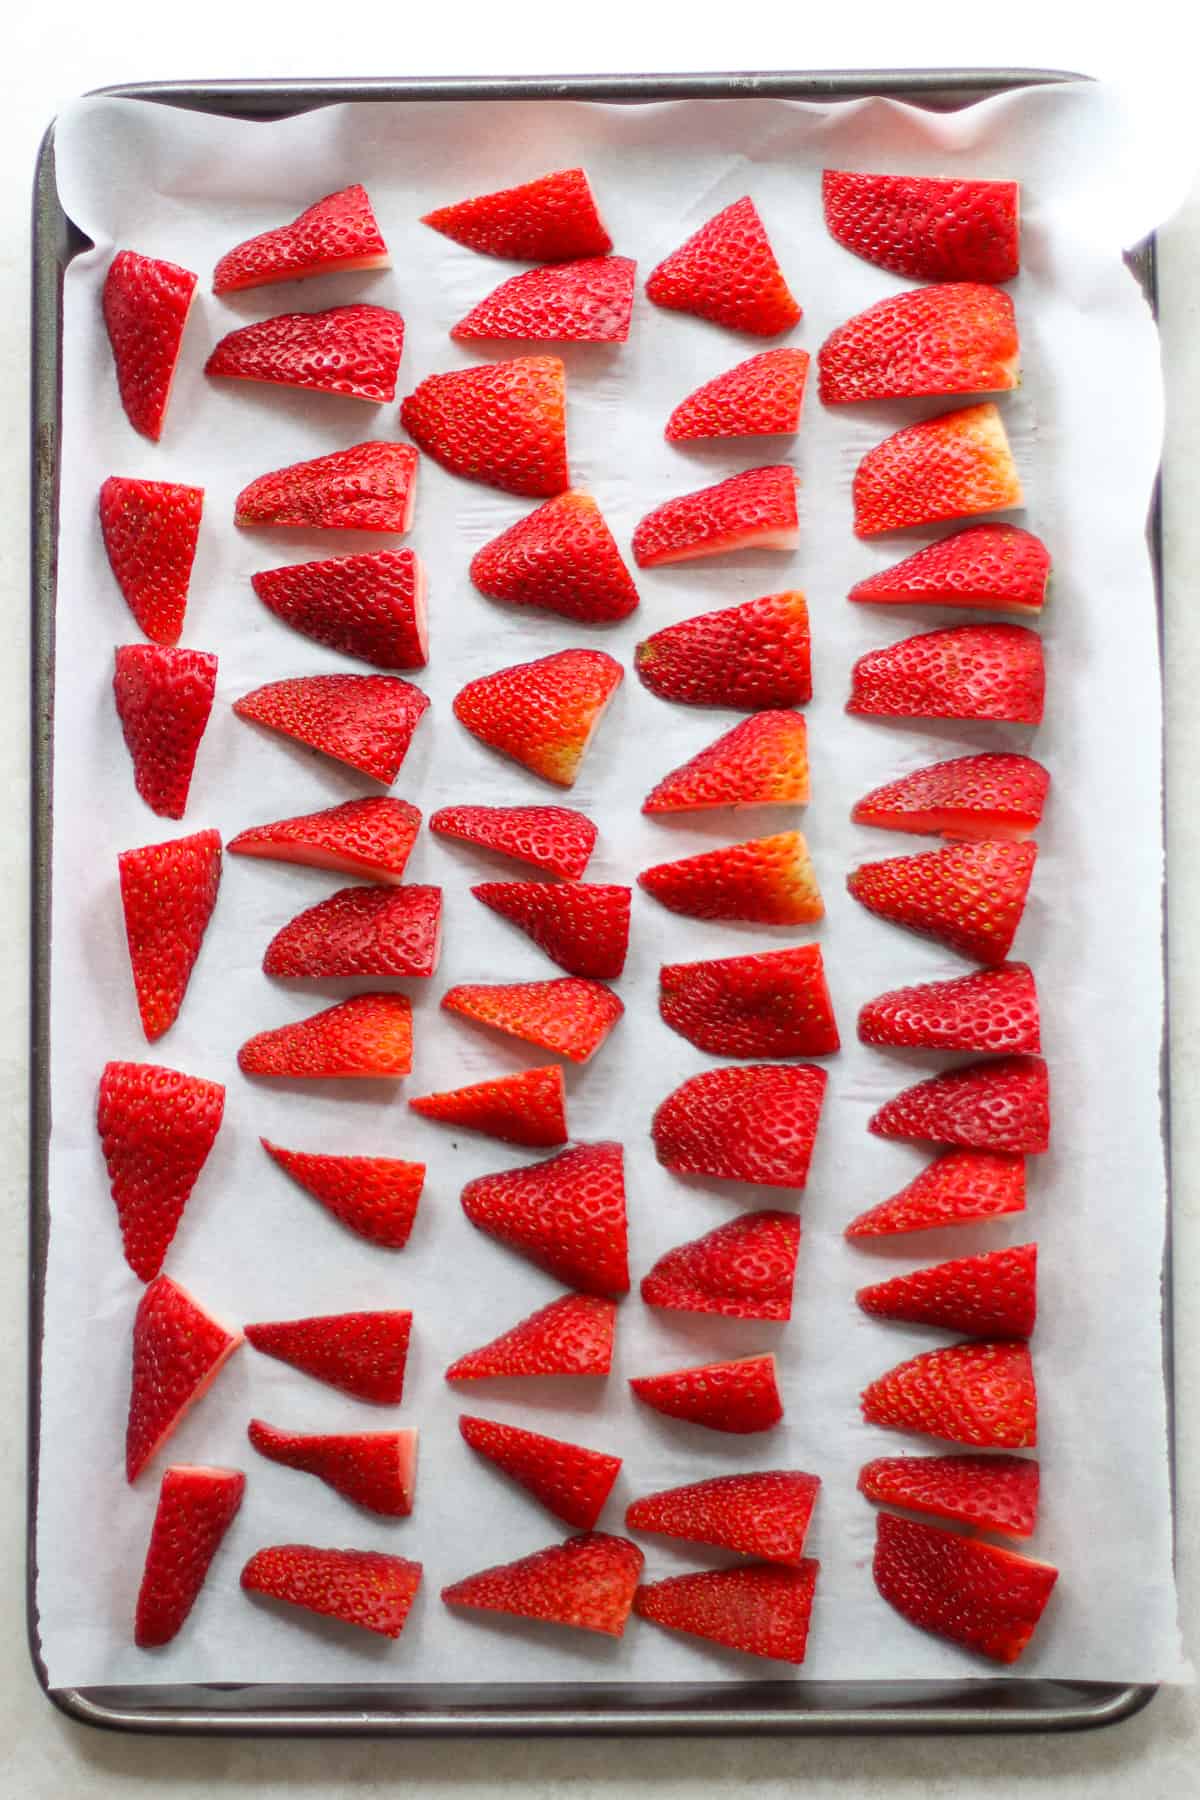 Sliced strawberries laid out on a parchment lined baking sheet.